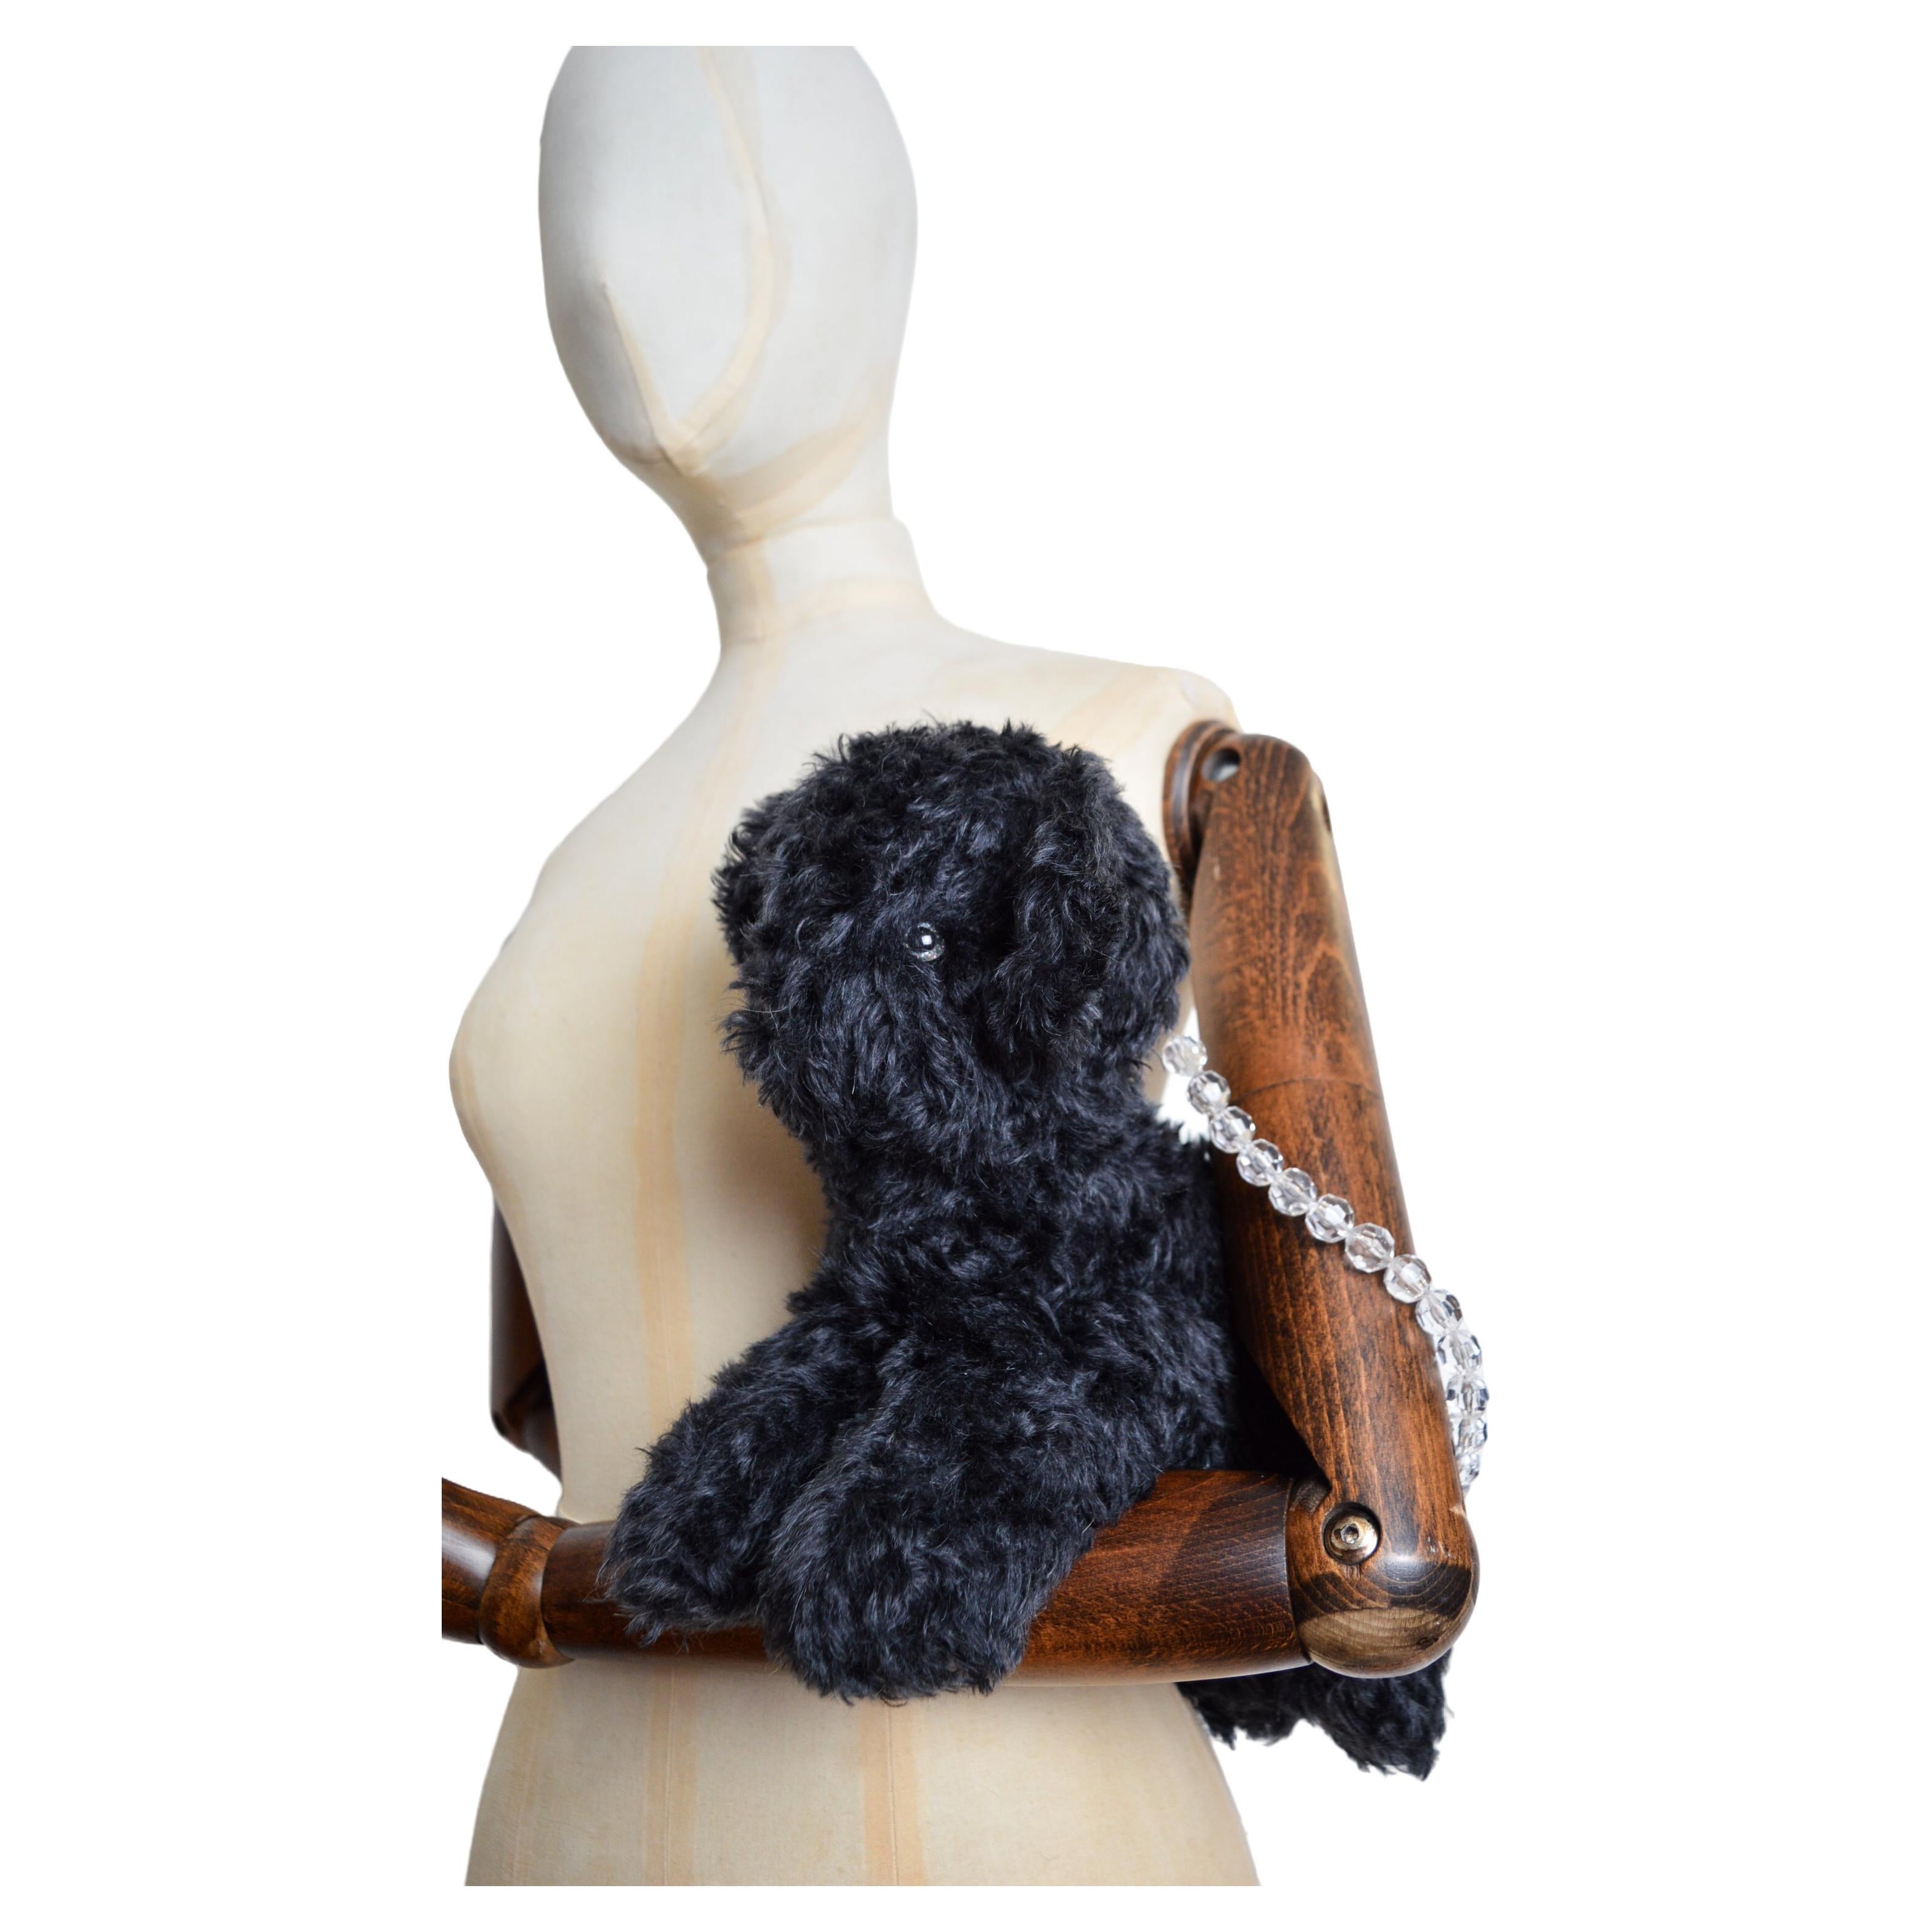 A fun Teddy bear Shaped 'Claudia' Mohair bag by British Designer 'ASHLEY WILLIAMS'

MADE IN ENGLAND.  

Features ; Beaded top handles, Bendable limbs and Tail, Cute Sparkly eyes and Nose, Zip fasten closure, Single Interior compartment (Fits and